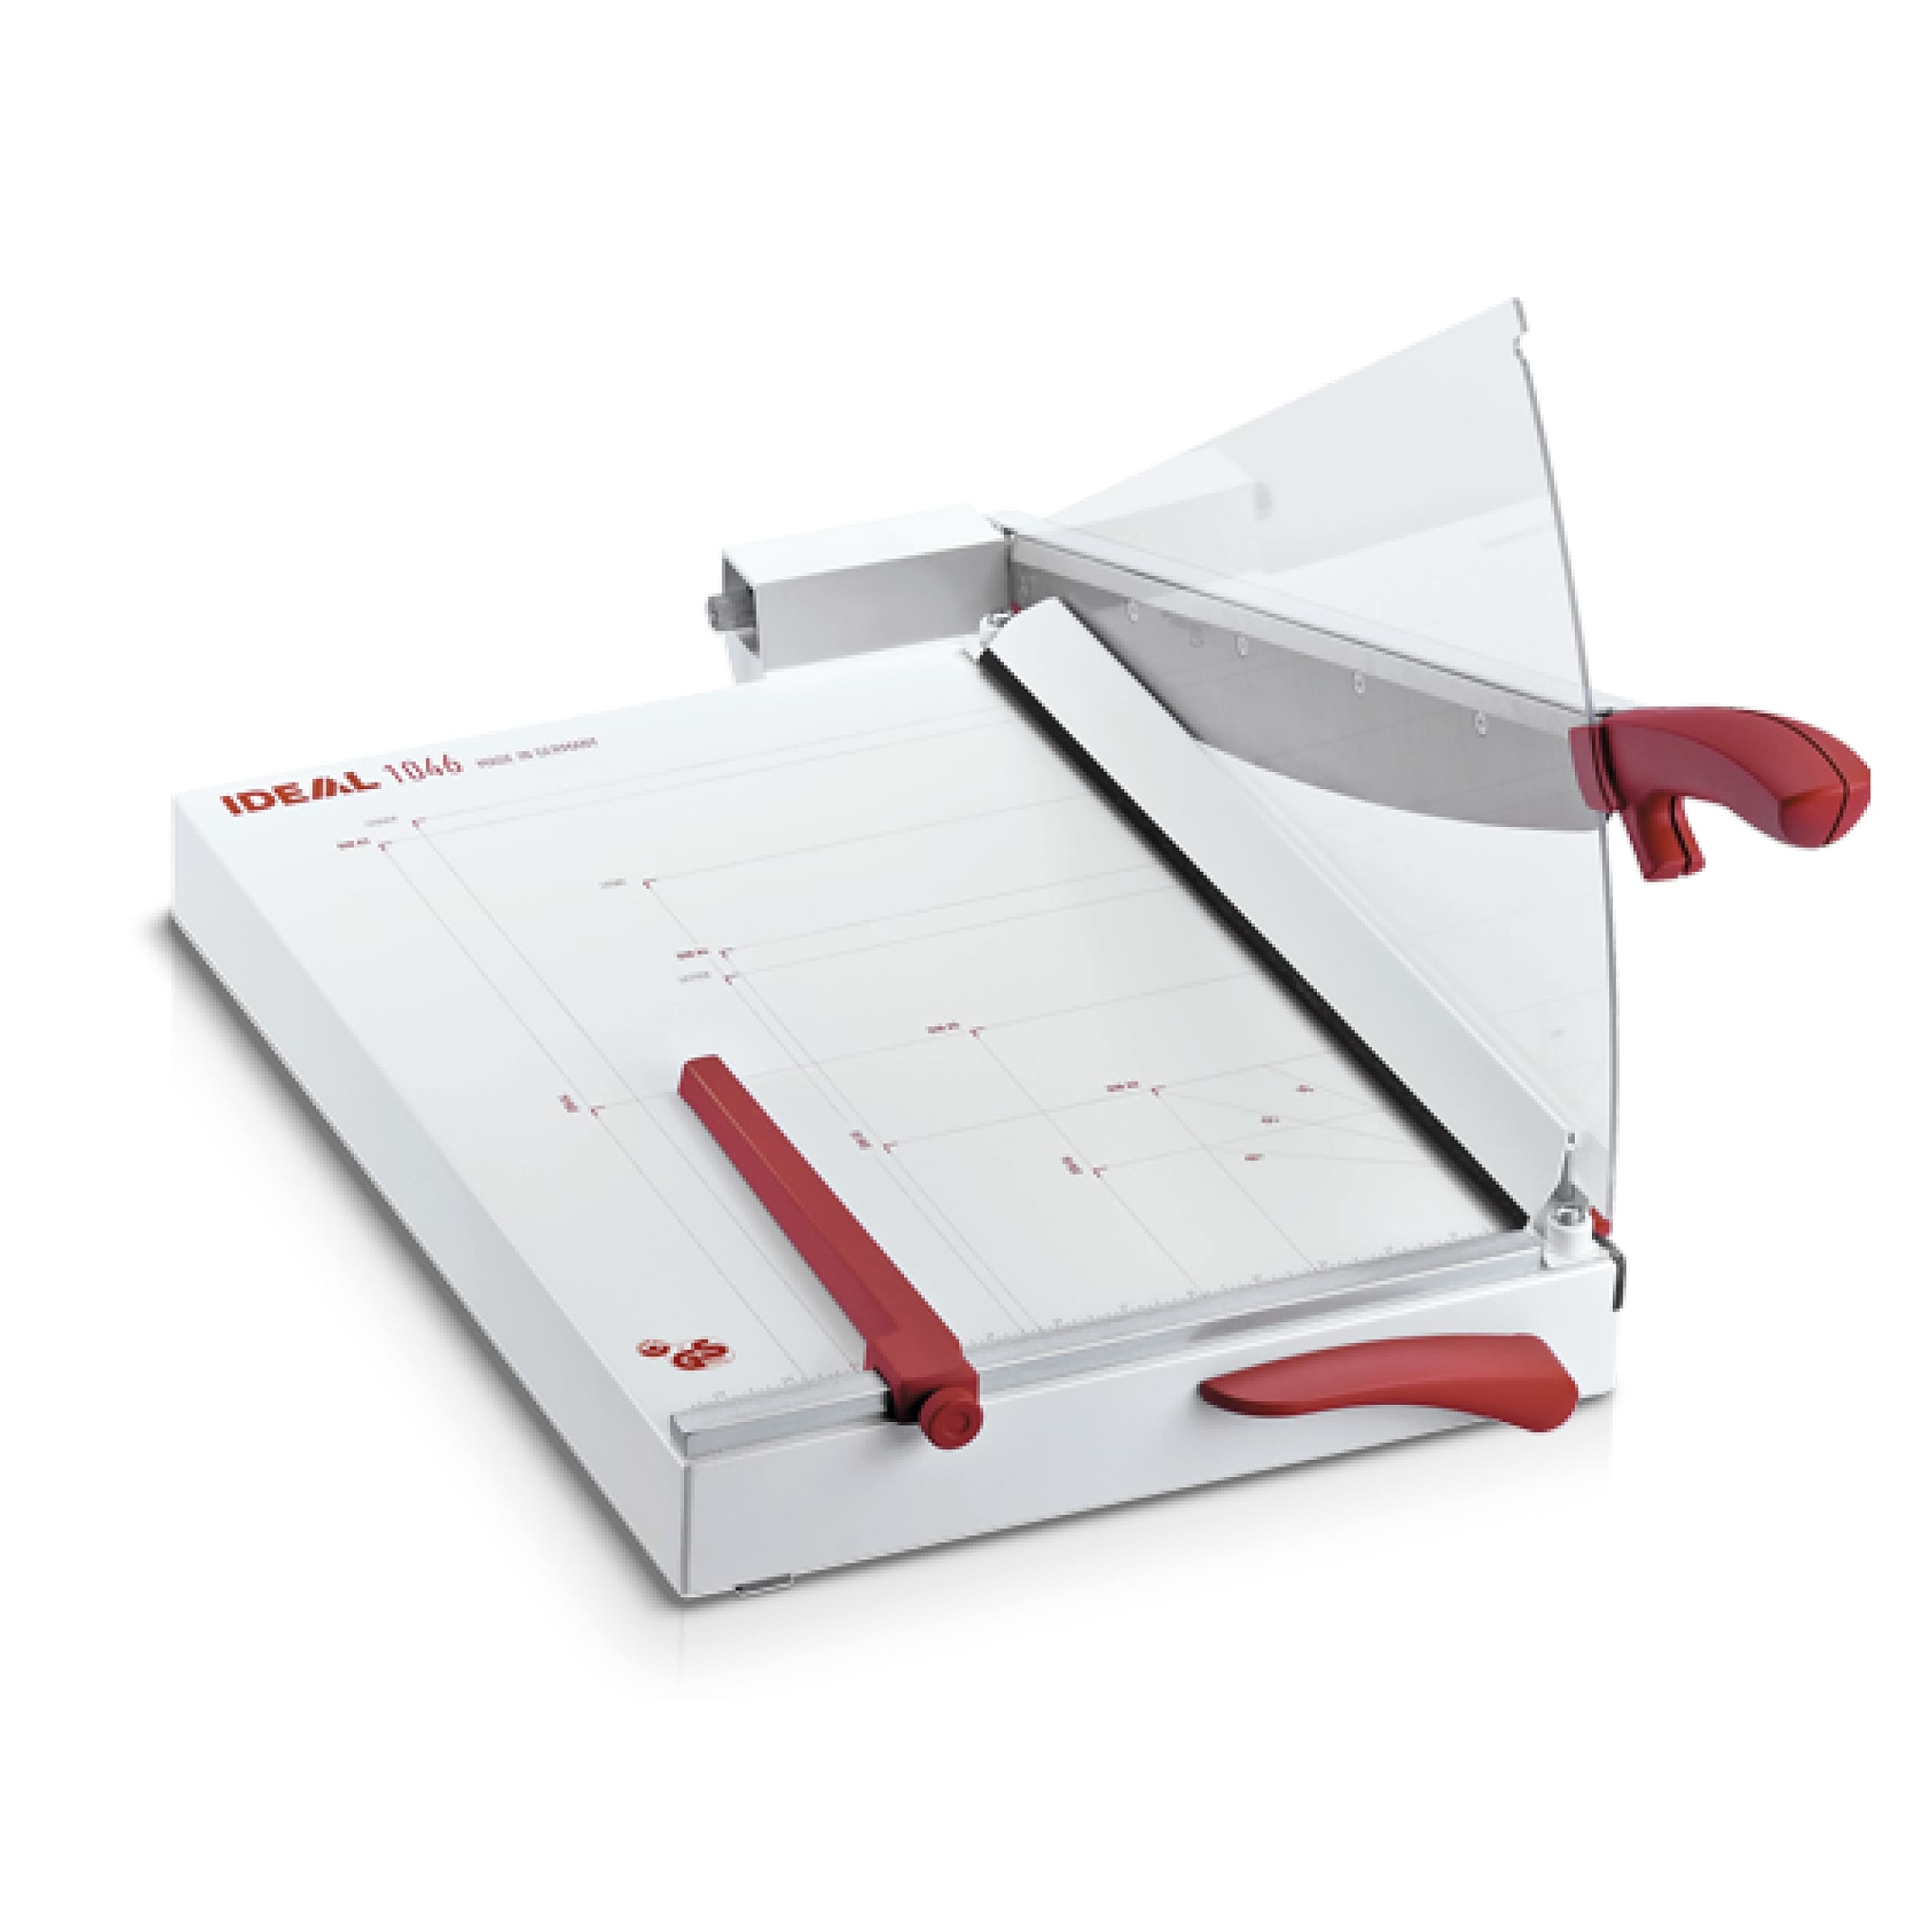 IDEAL Paper trimmer - Type IDEAL 1046 - Cutting length (in mm) 460 - zu trim paper and thin cardboard...